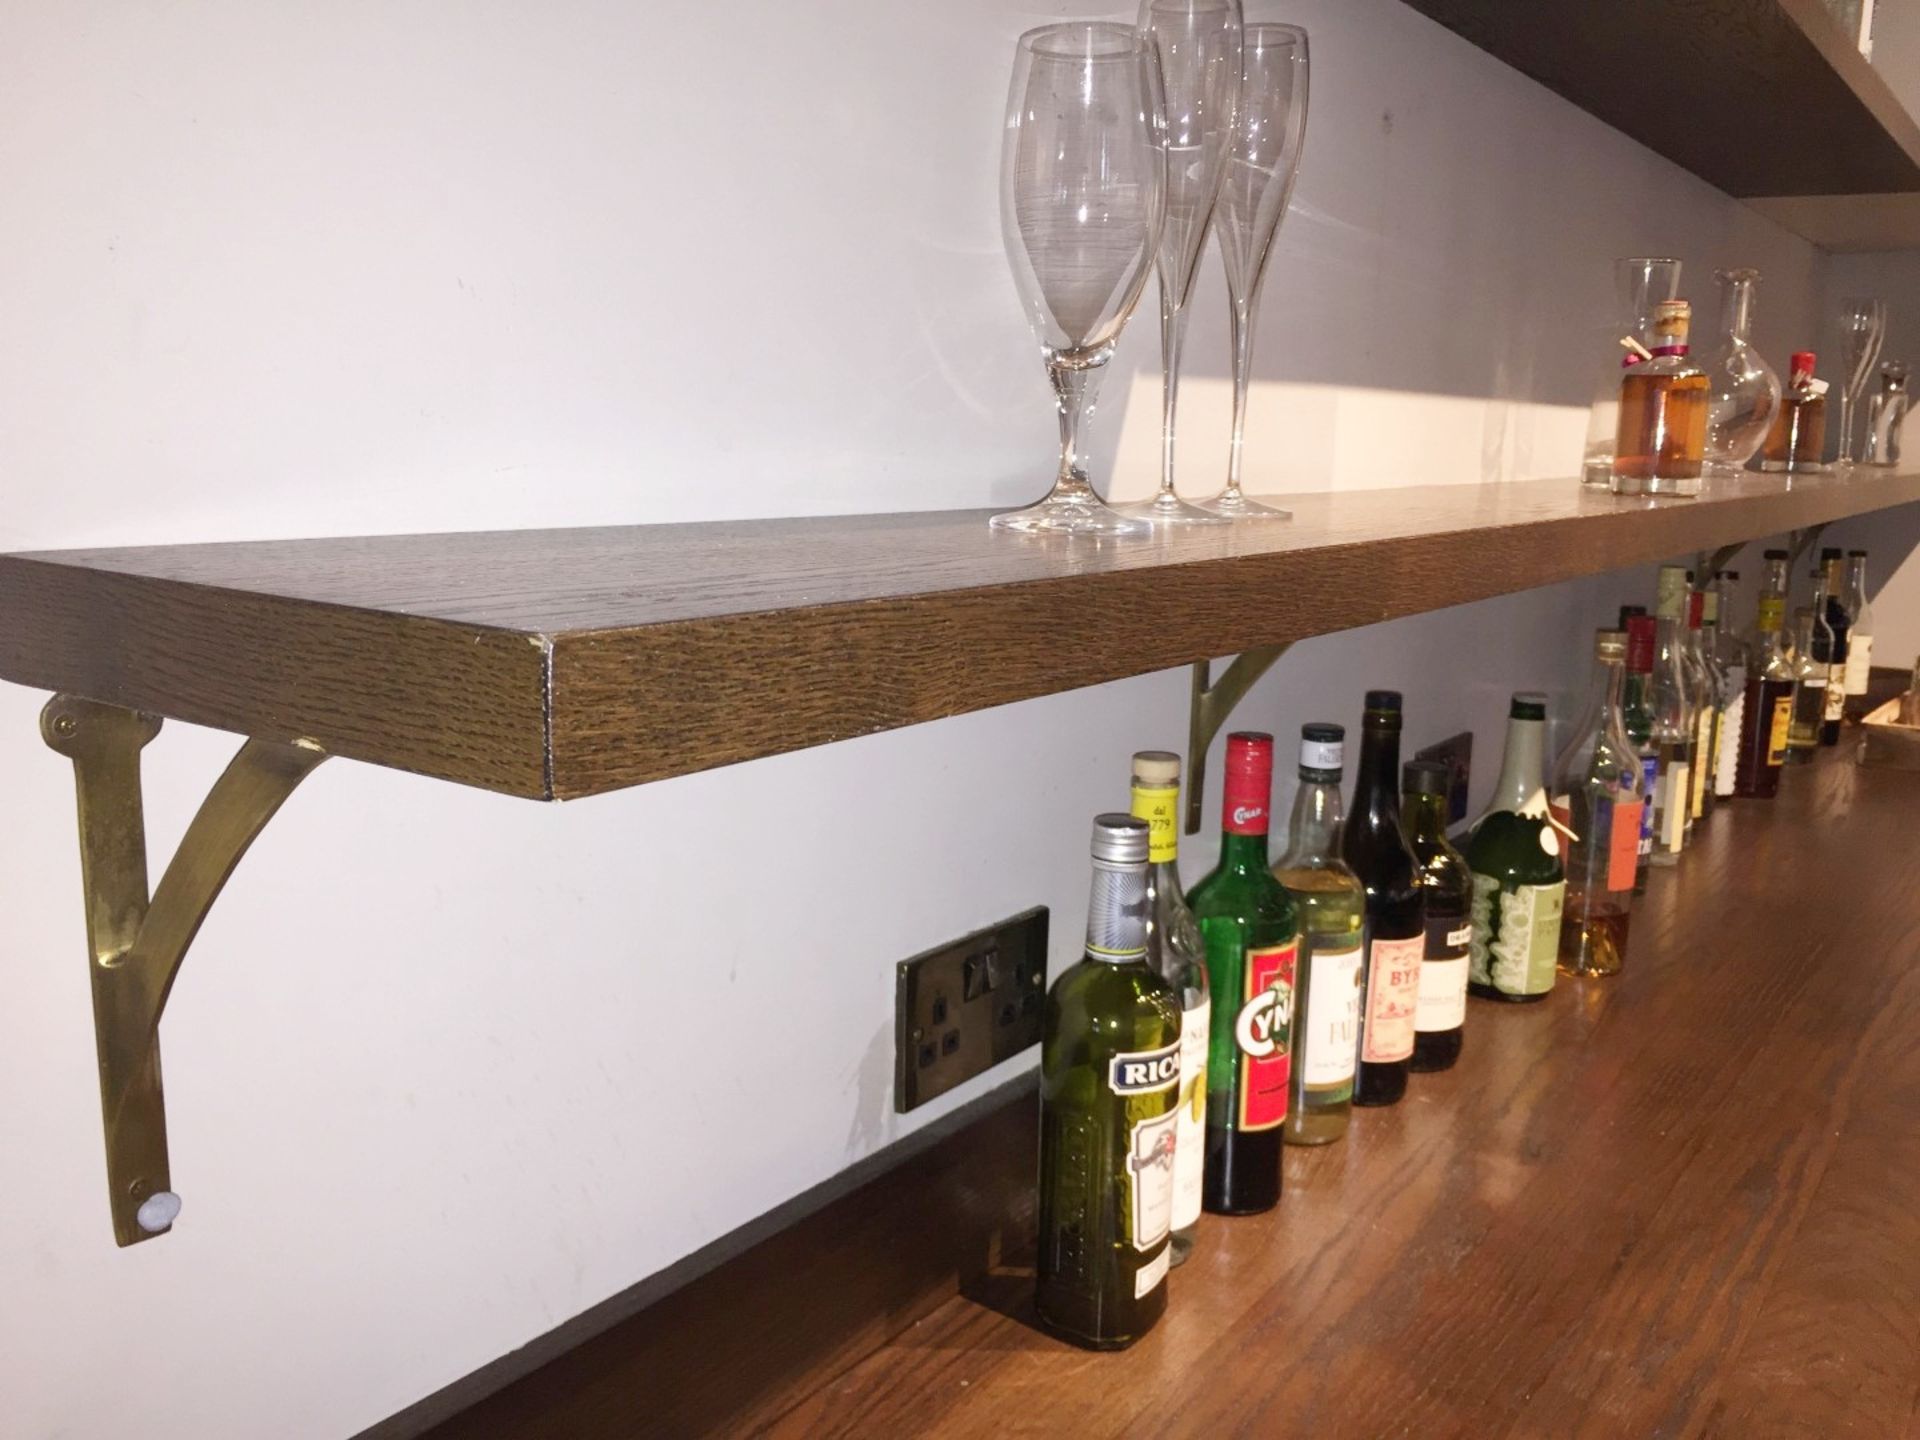 1 x Large Solid Wood Bar Shelf - Over 3 Metres Wide - Ideal For Hotels, Bars, and Restaurants - Orig